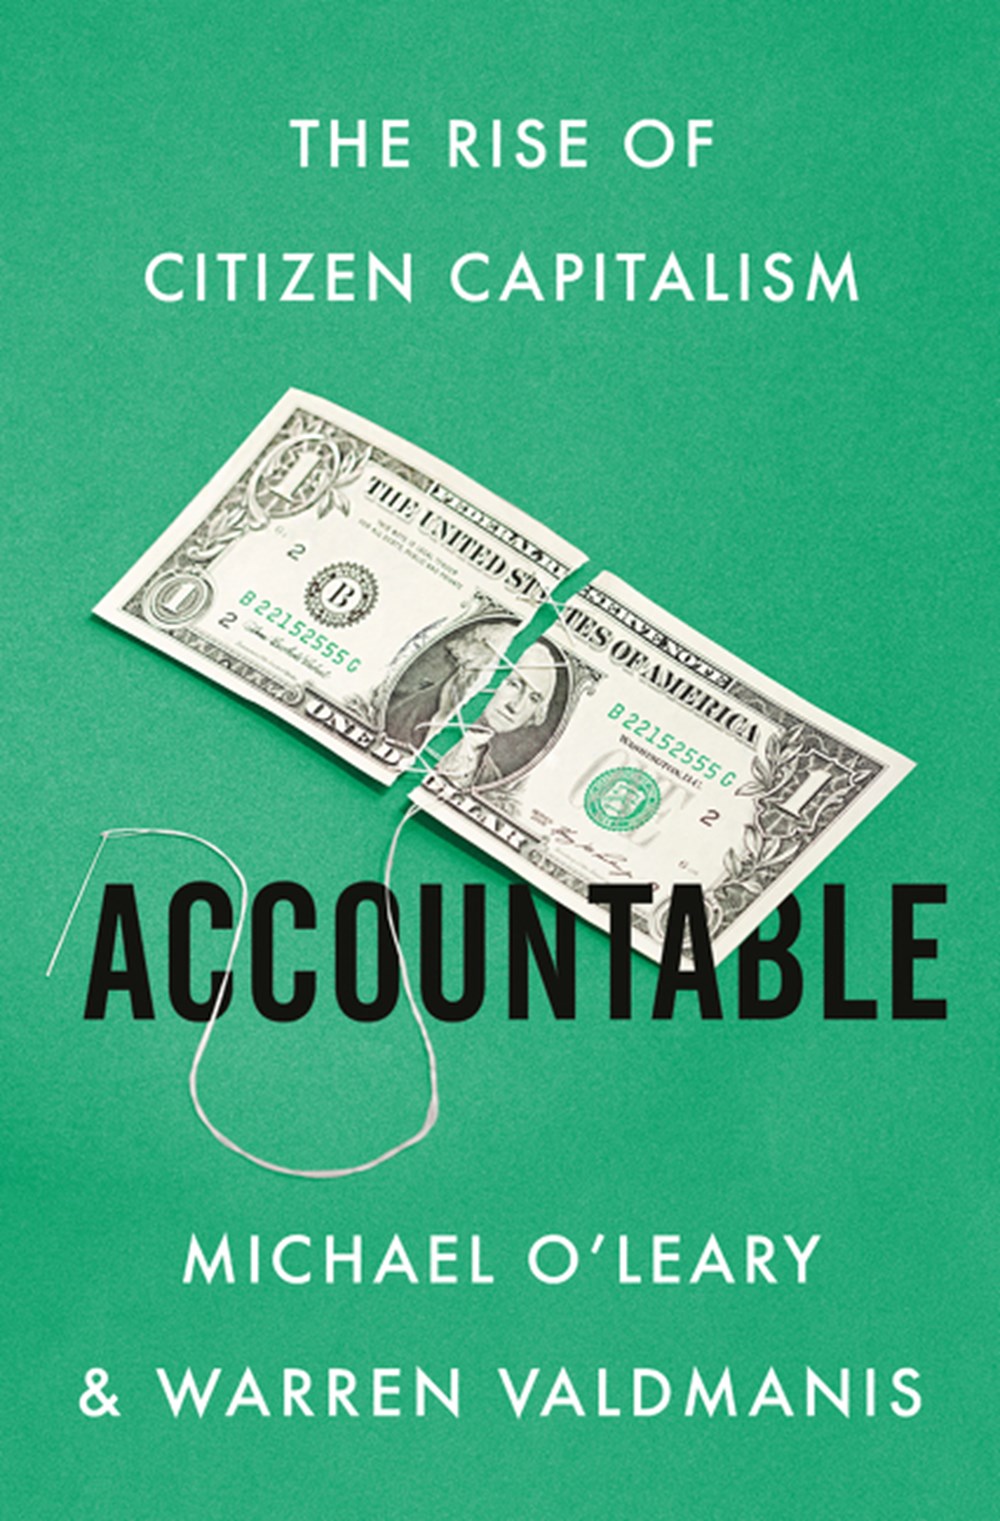 Accountable: The Rise of Citizen Capitalism